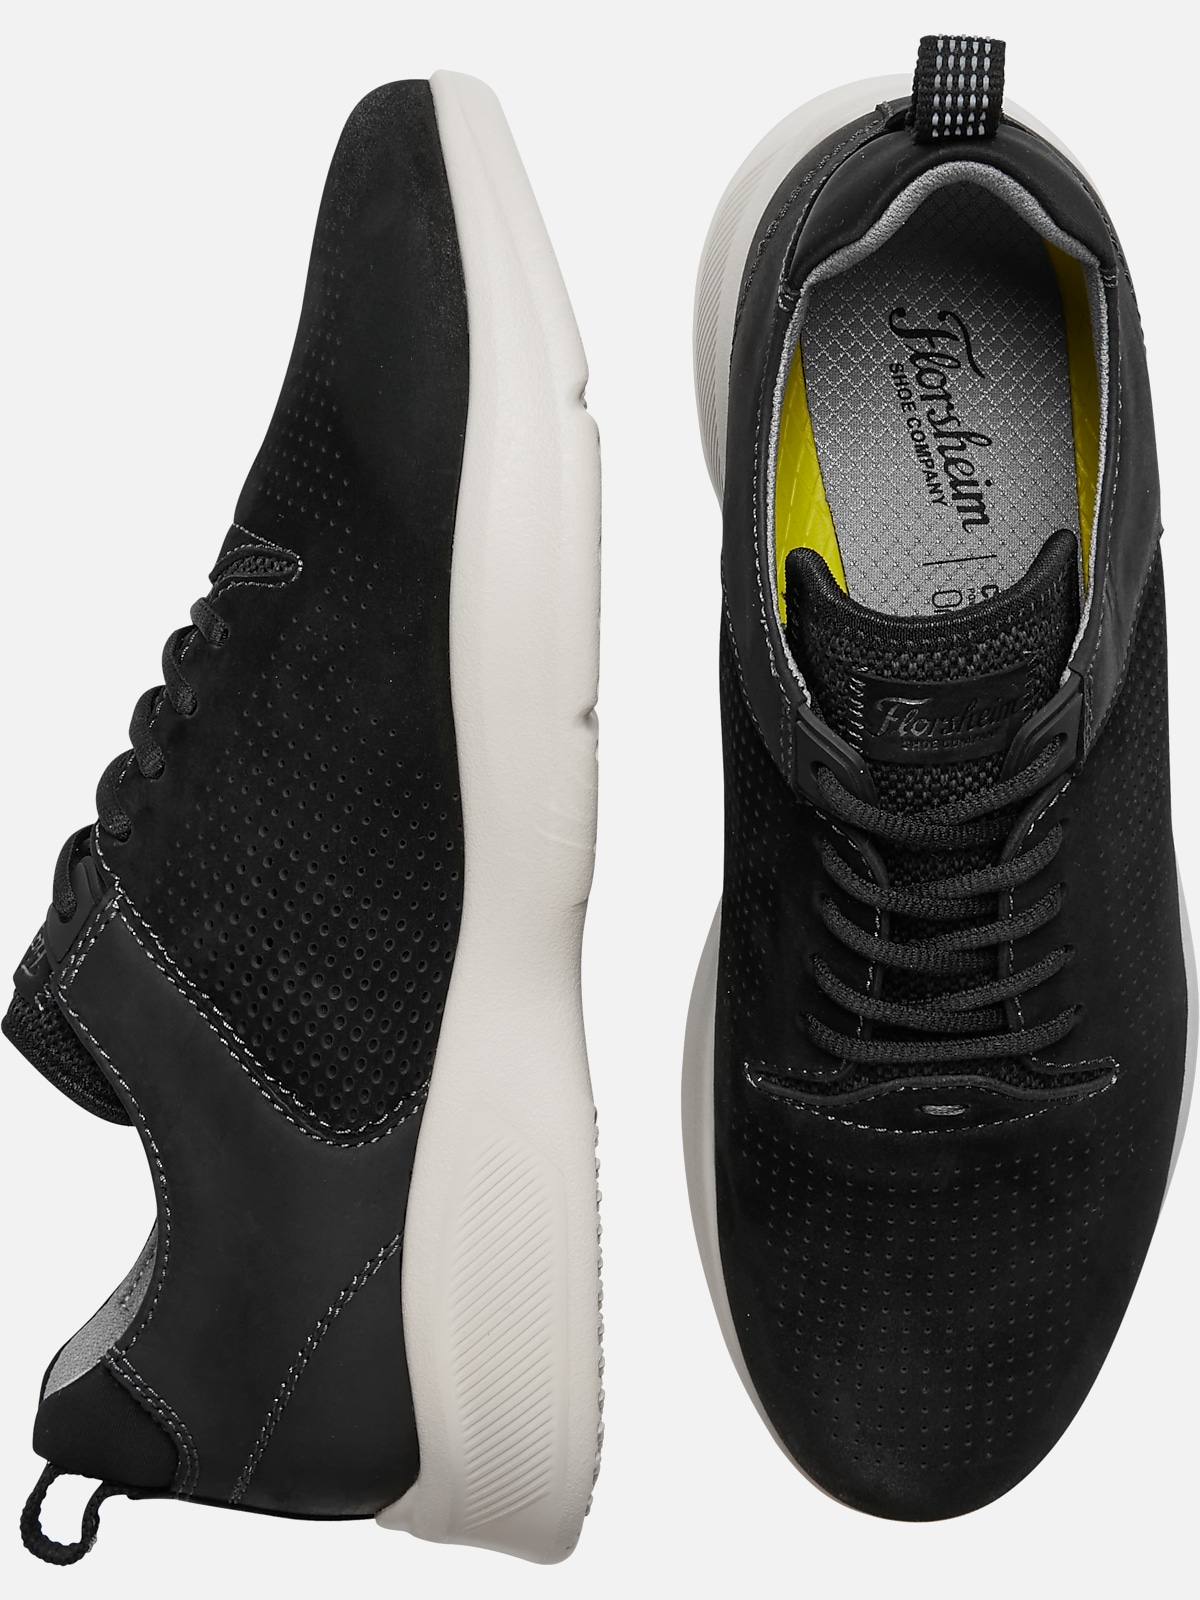 Florsheim Studio Perforated Lace Up Sneaker | All Sale| Men's Wearhouse